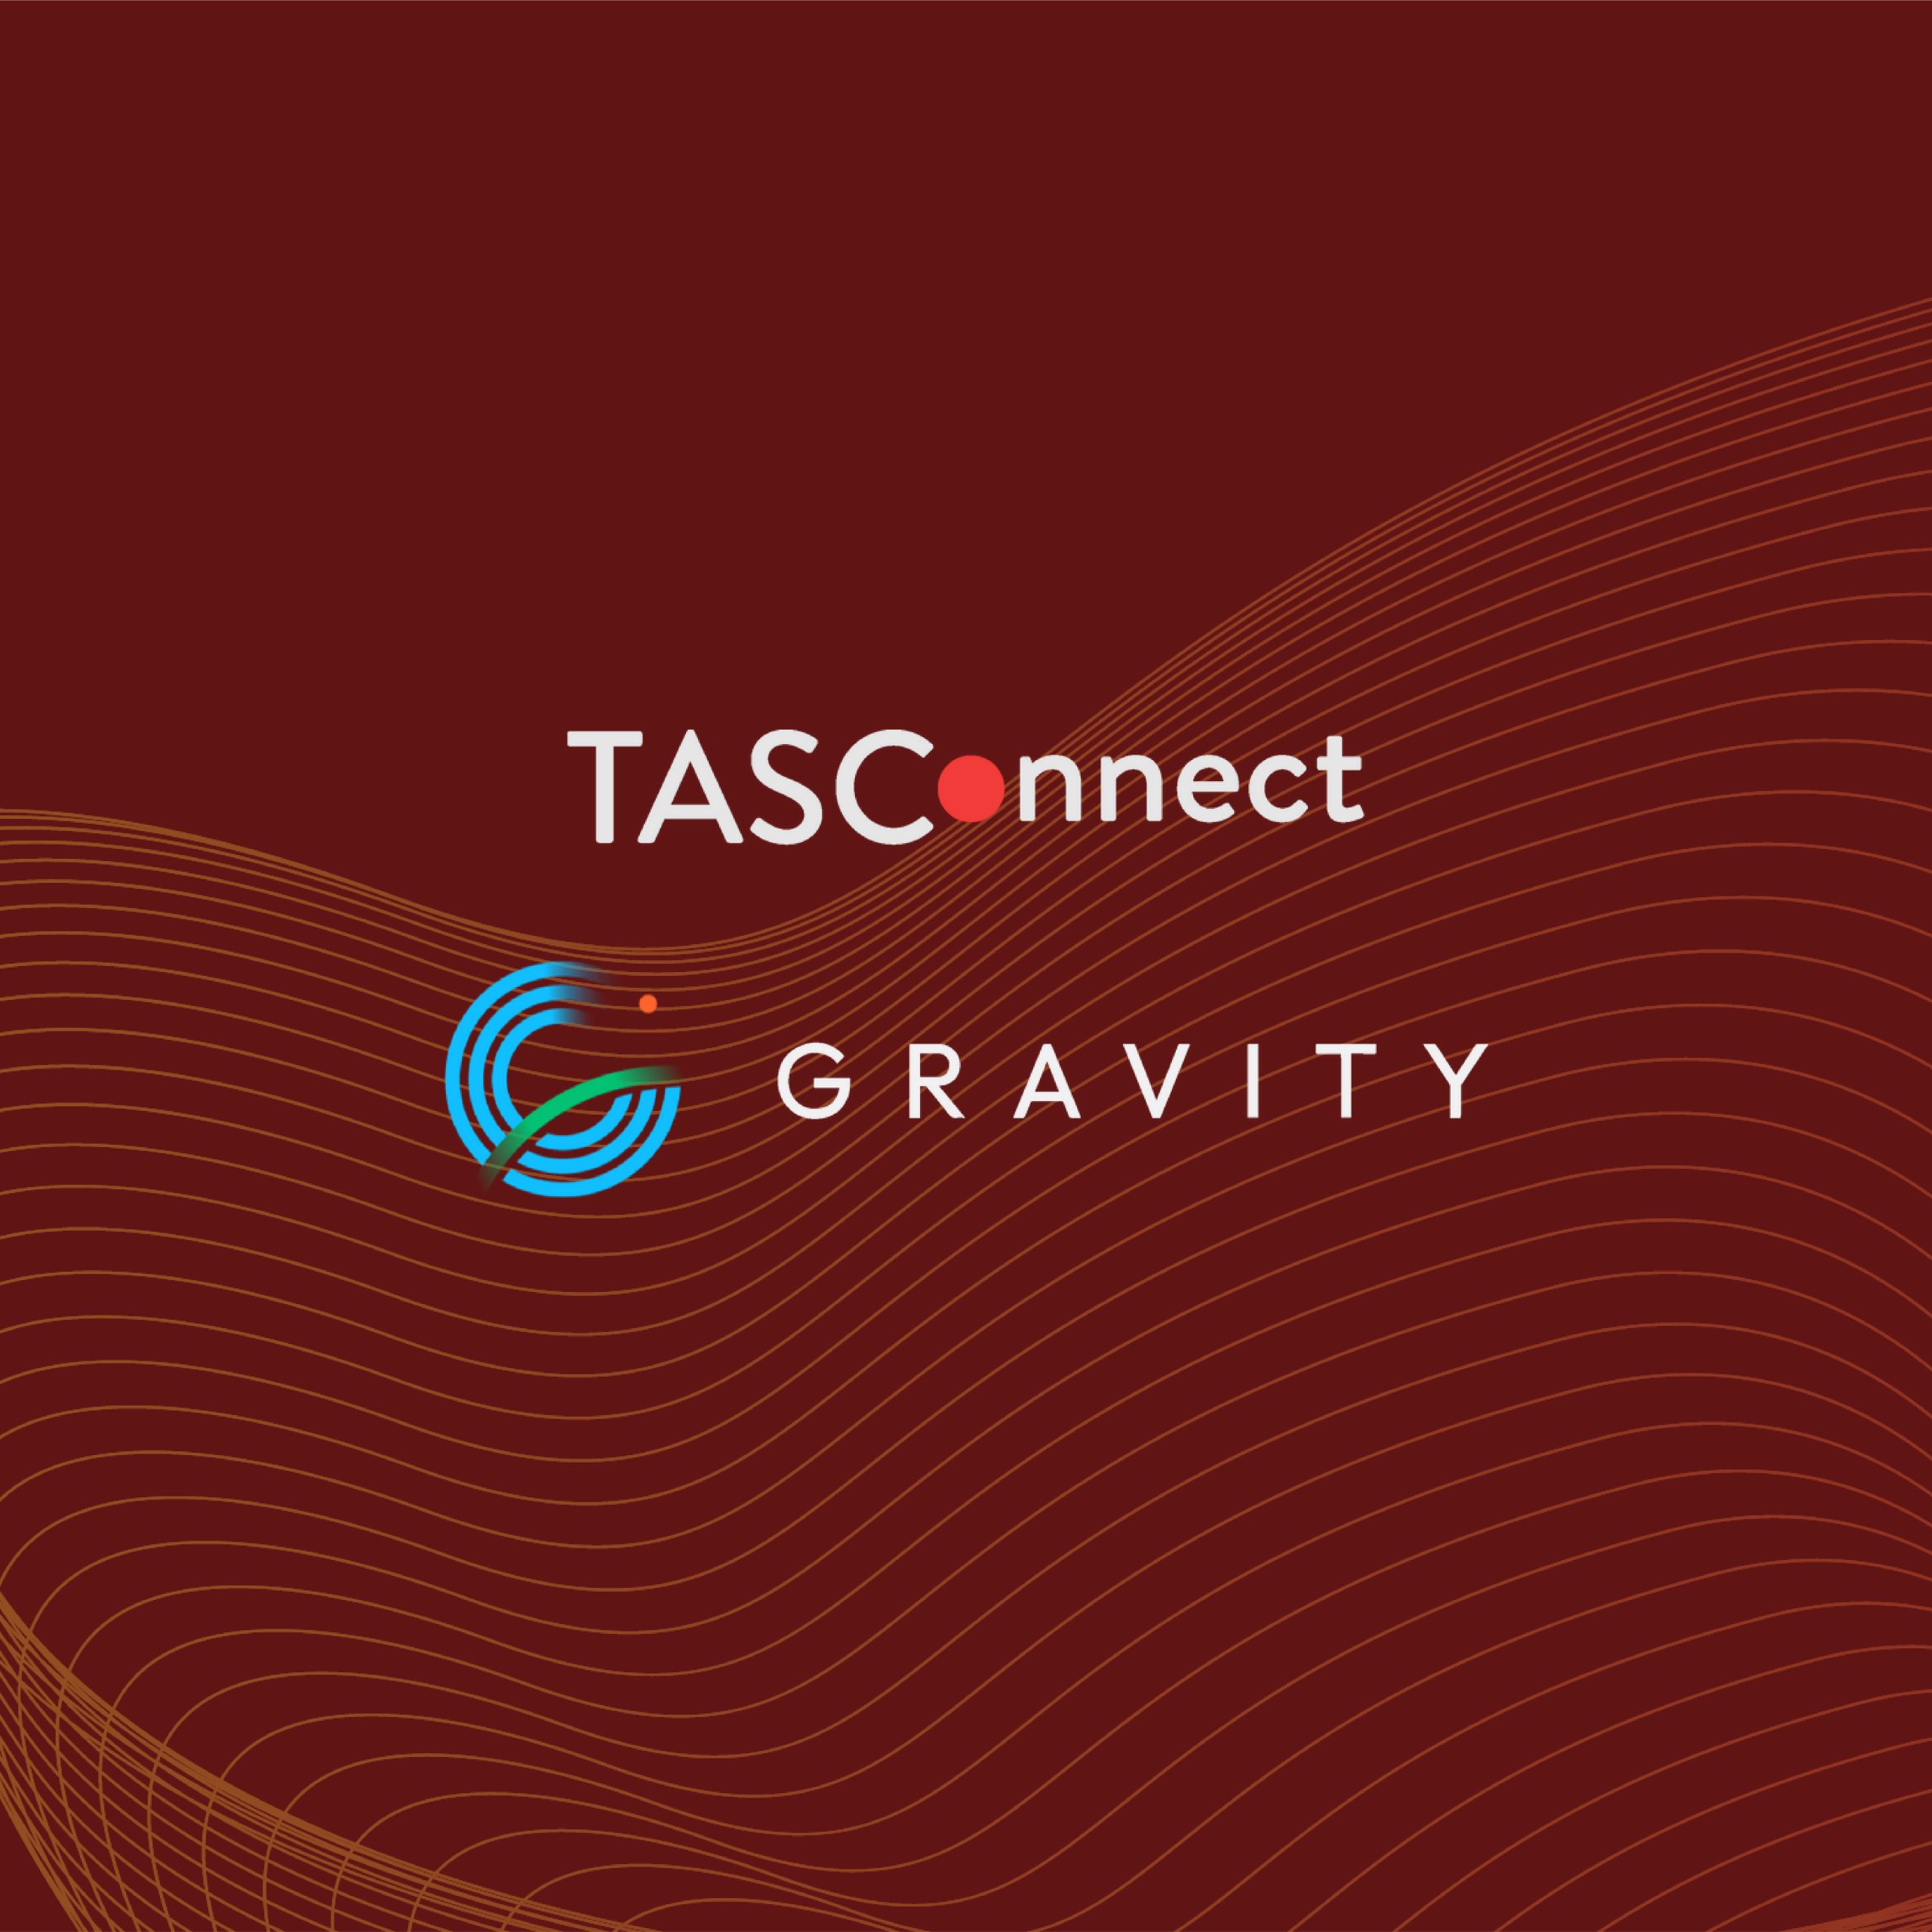 TASConnect transforms procurement, financing and supply chain operations with GraviTASC, in collaboration with Gravity